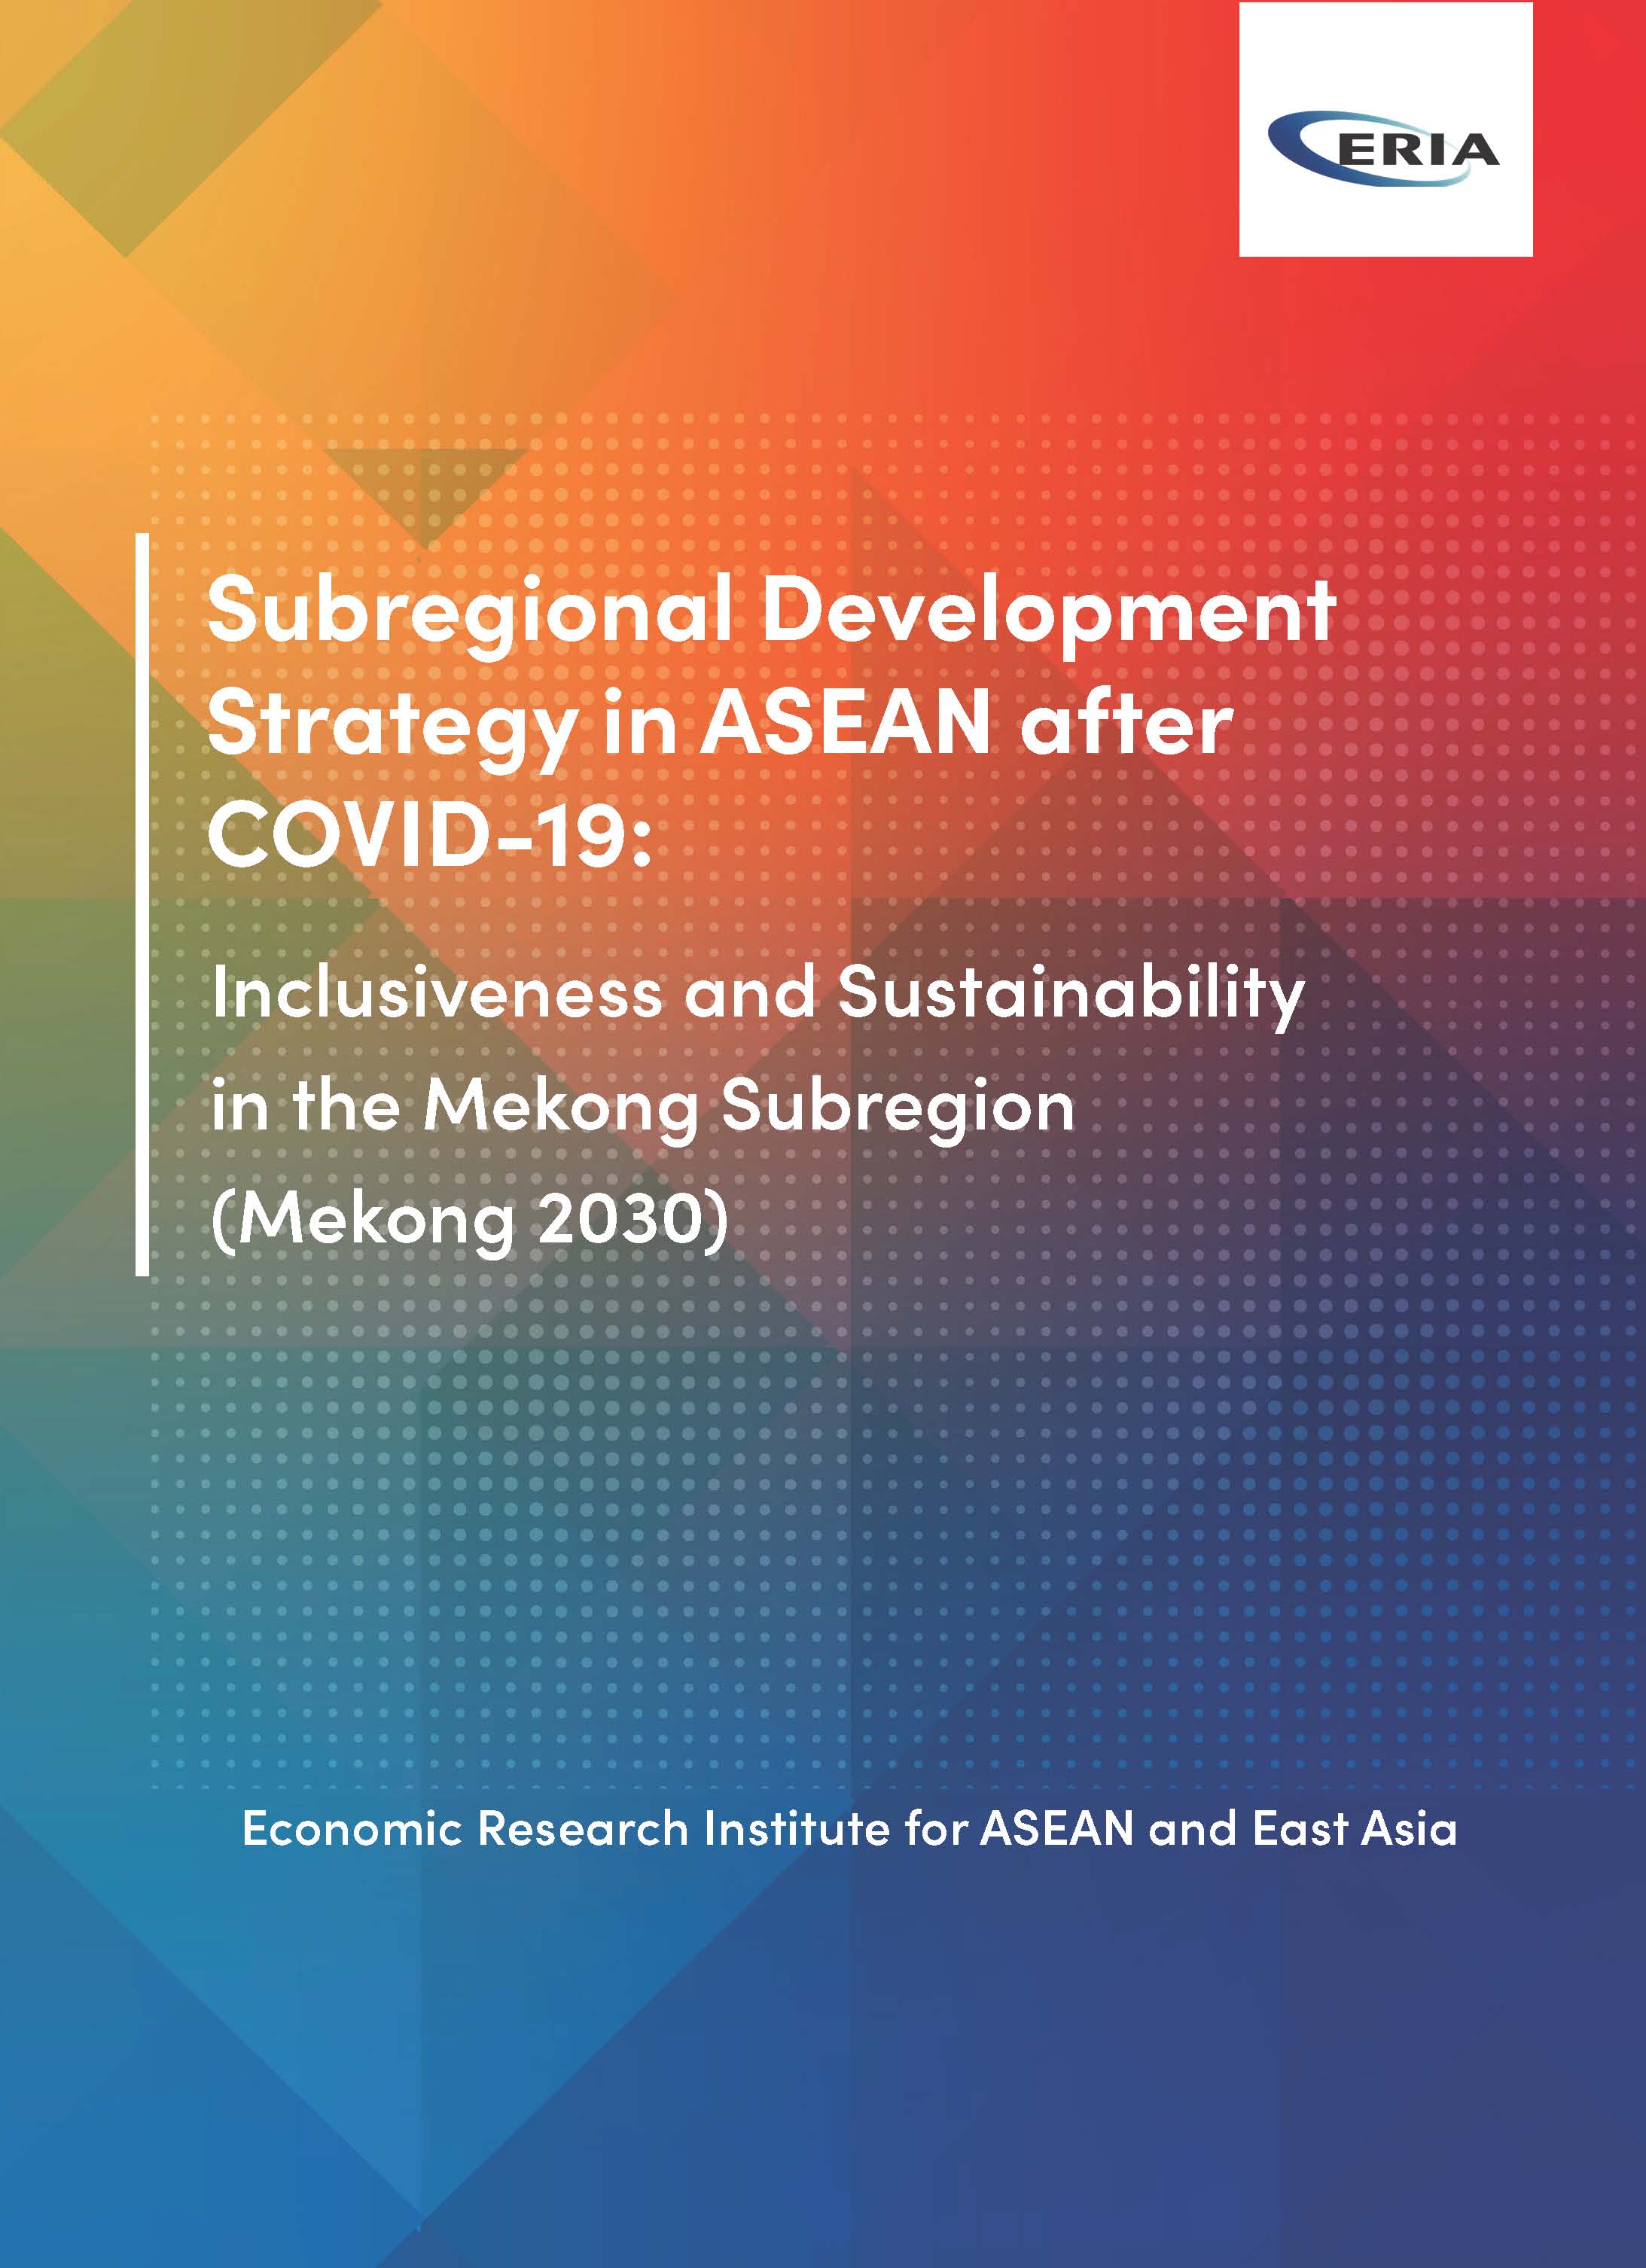 Subregional Development Strategy in ASEAN after COVID-19: Inclusiveness and Sustainability in the Mekong Subregion (Mekong 2030)